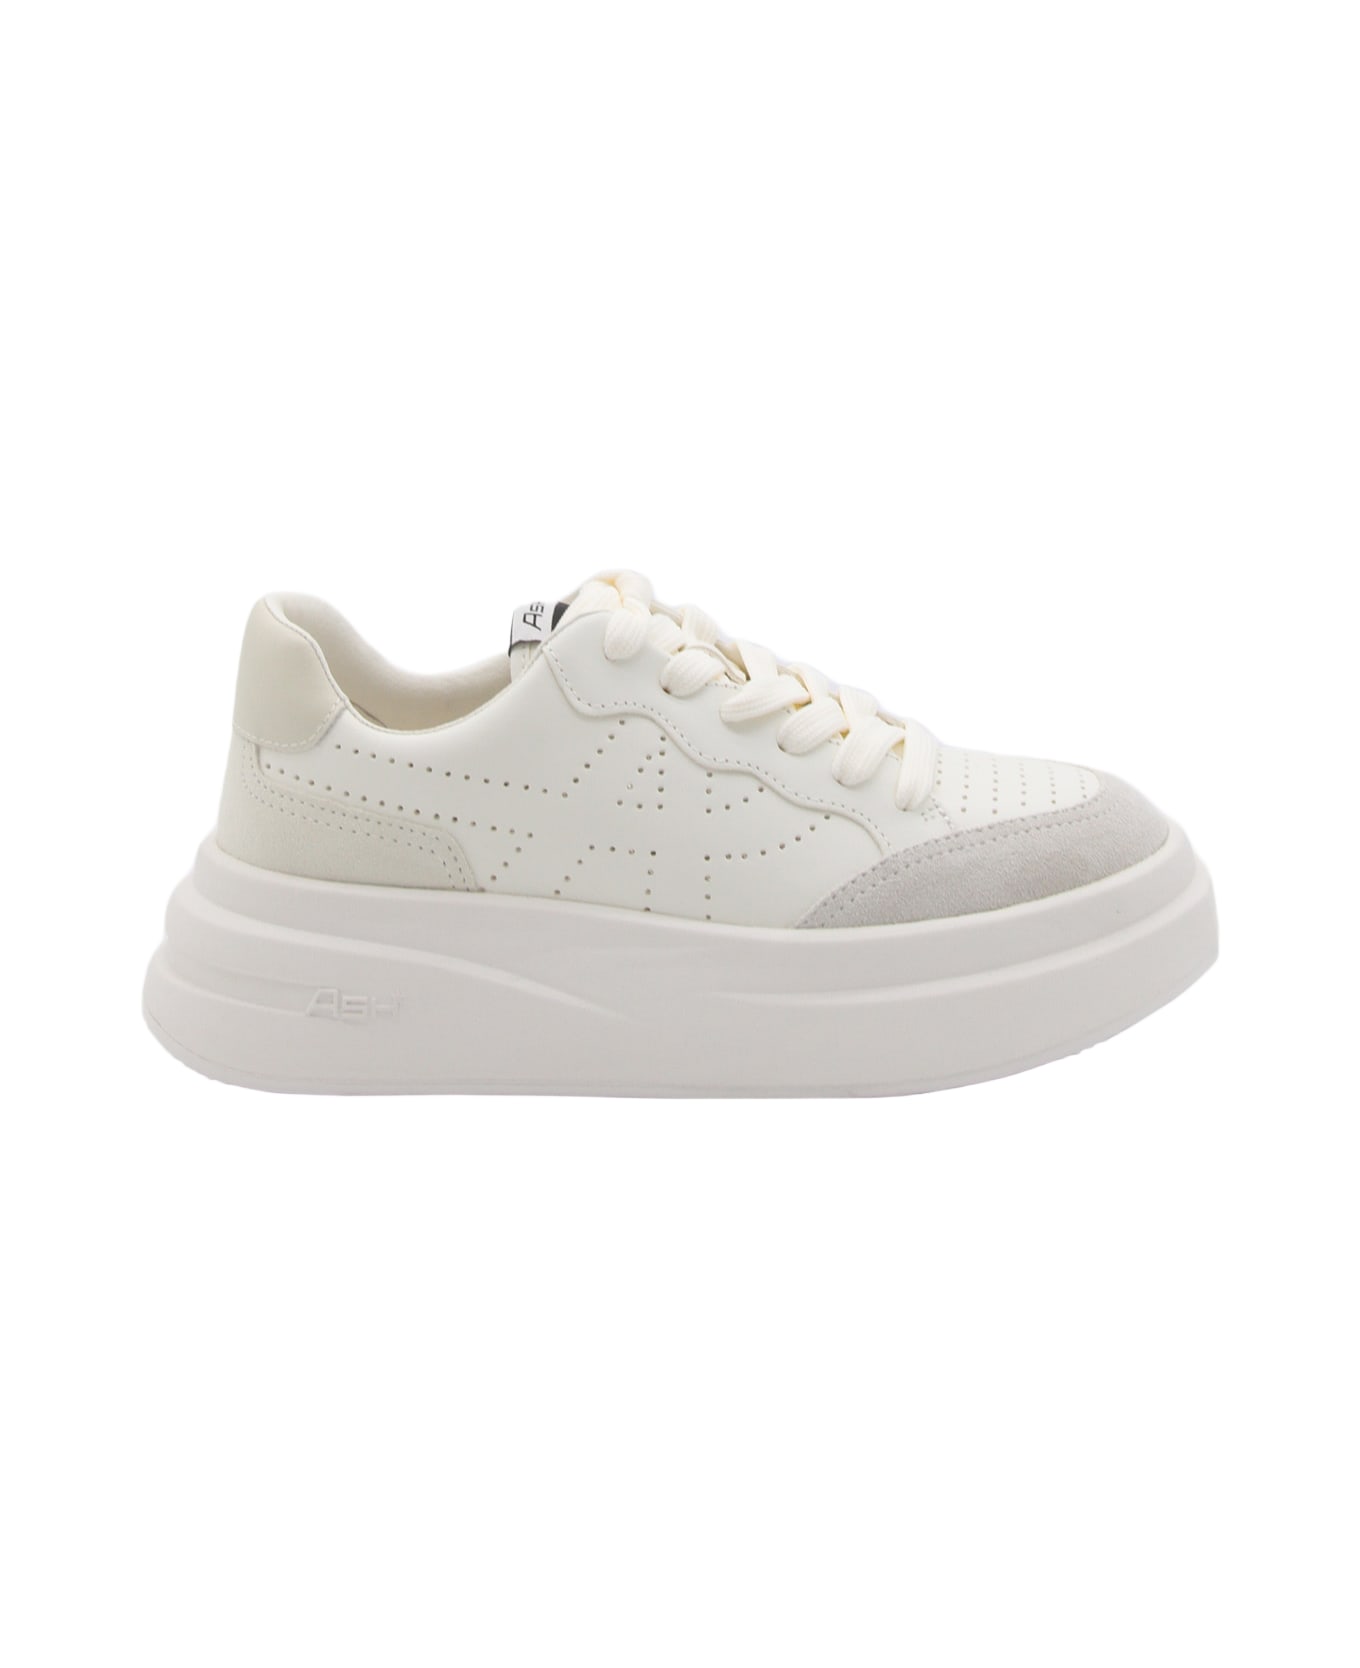 Ash White And Talc Leather Sneakers - WHITE/TALC